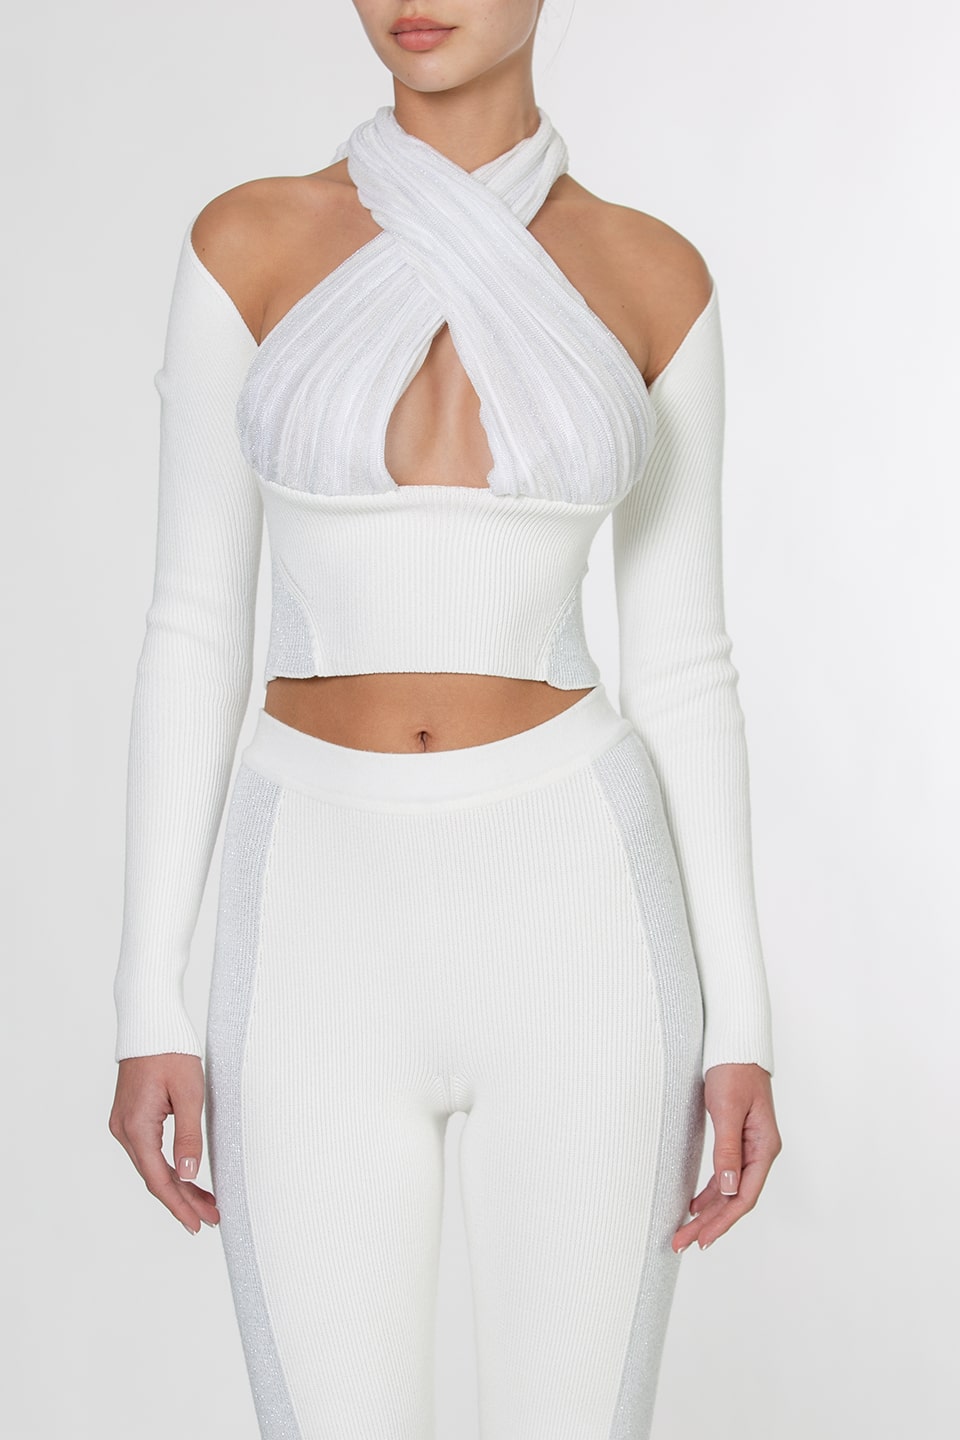 Designer White Women long sleeve, shop online with free delivery in UAE. Product gallery 4